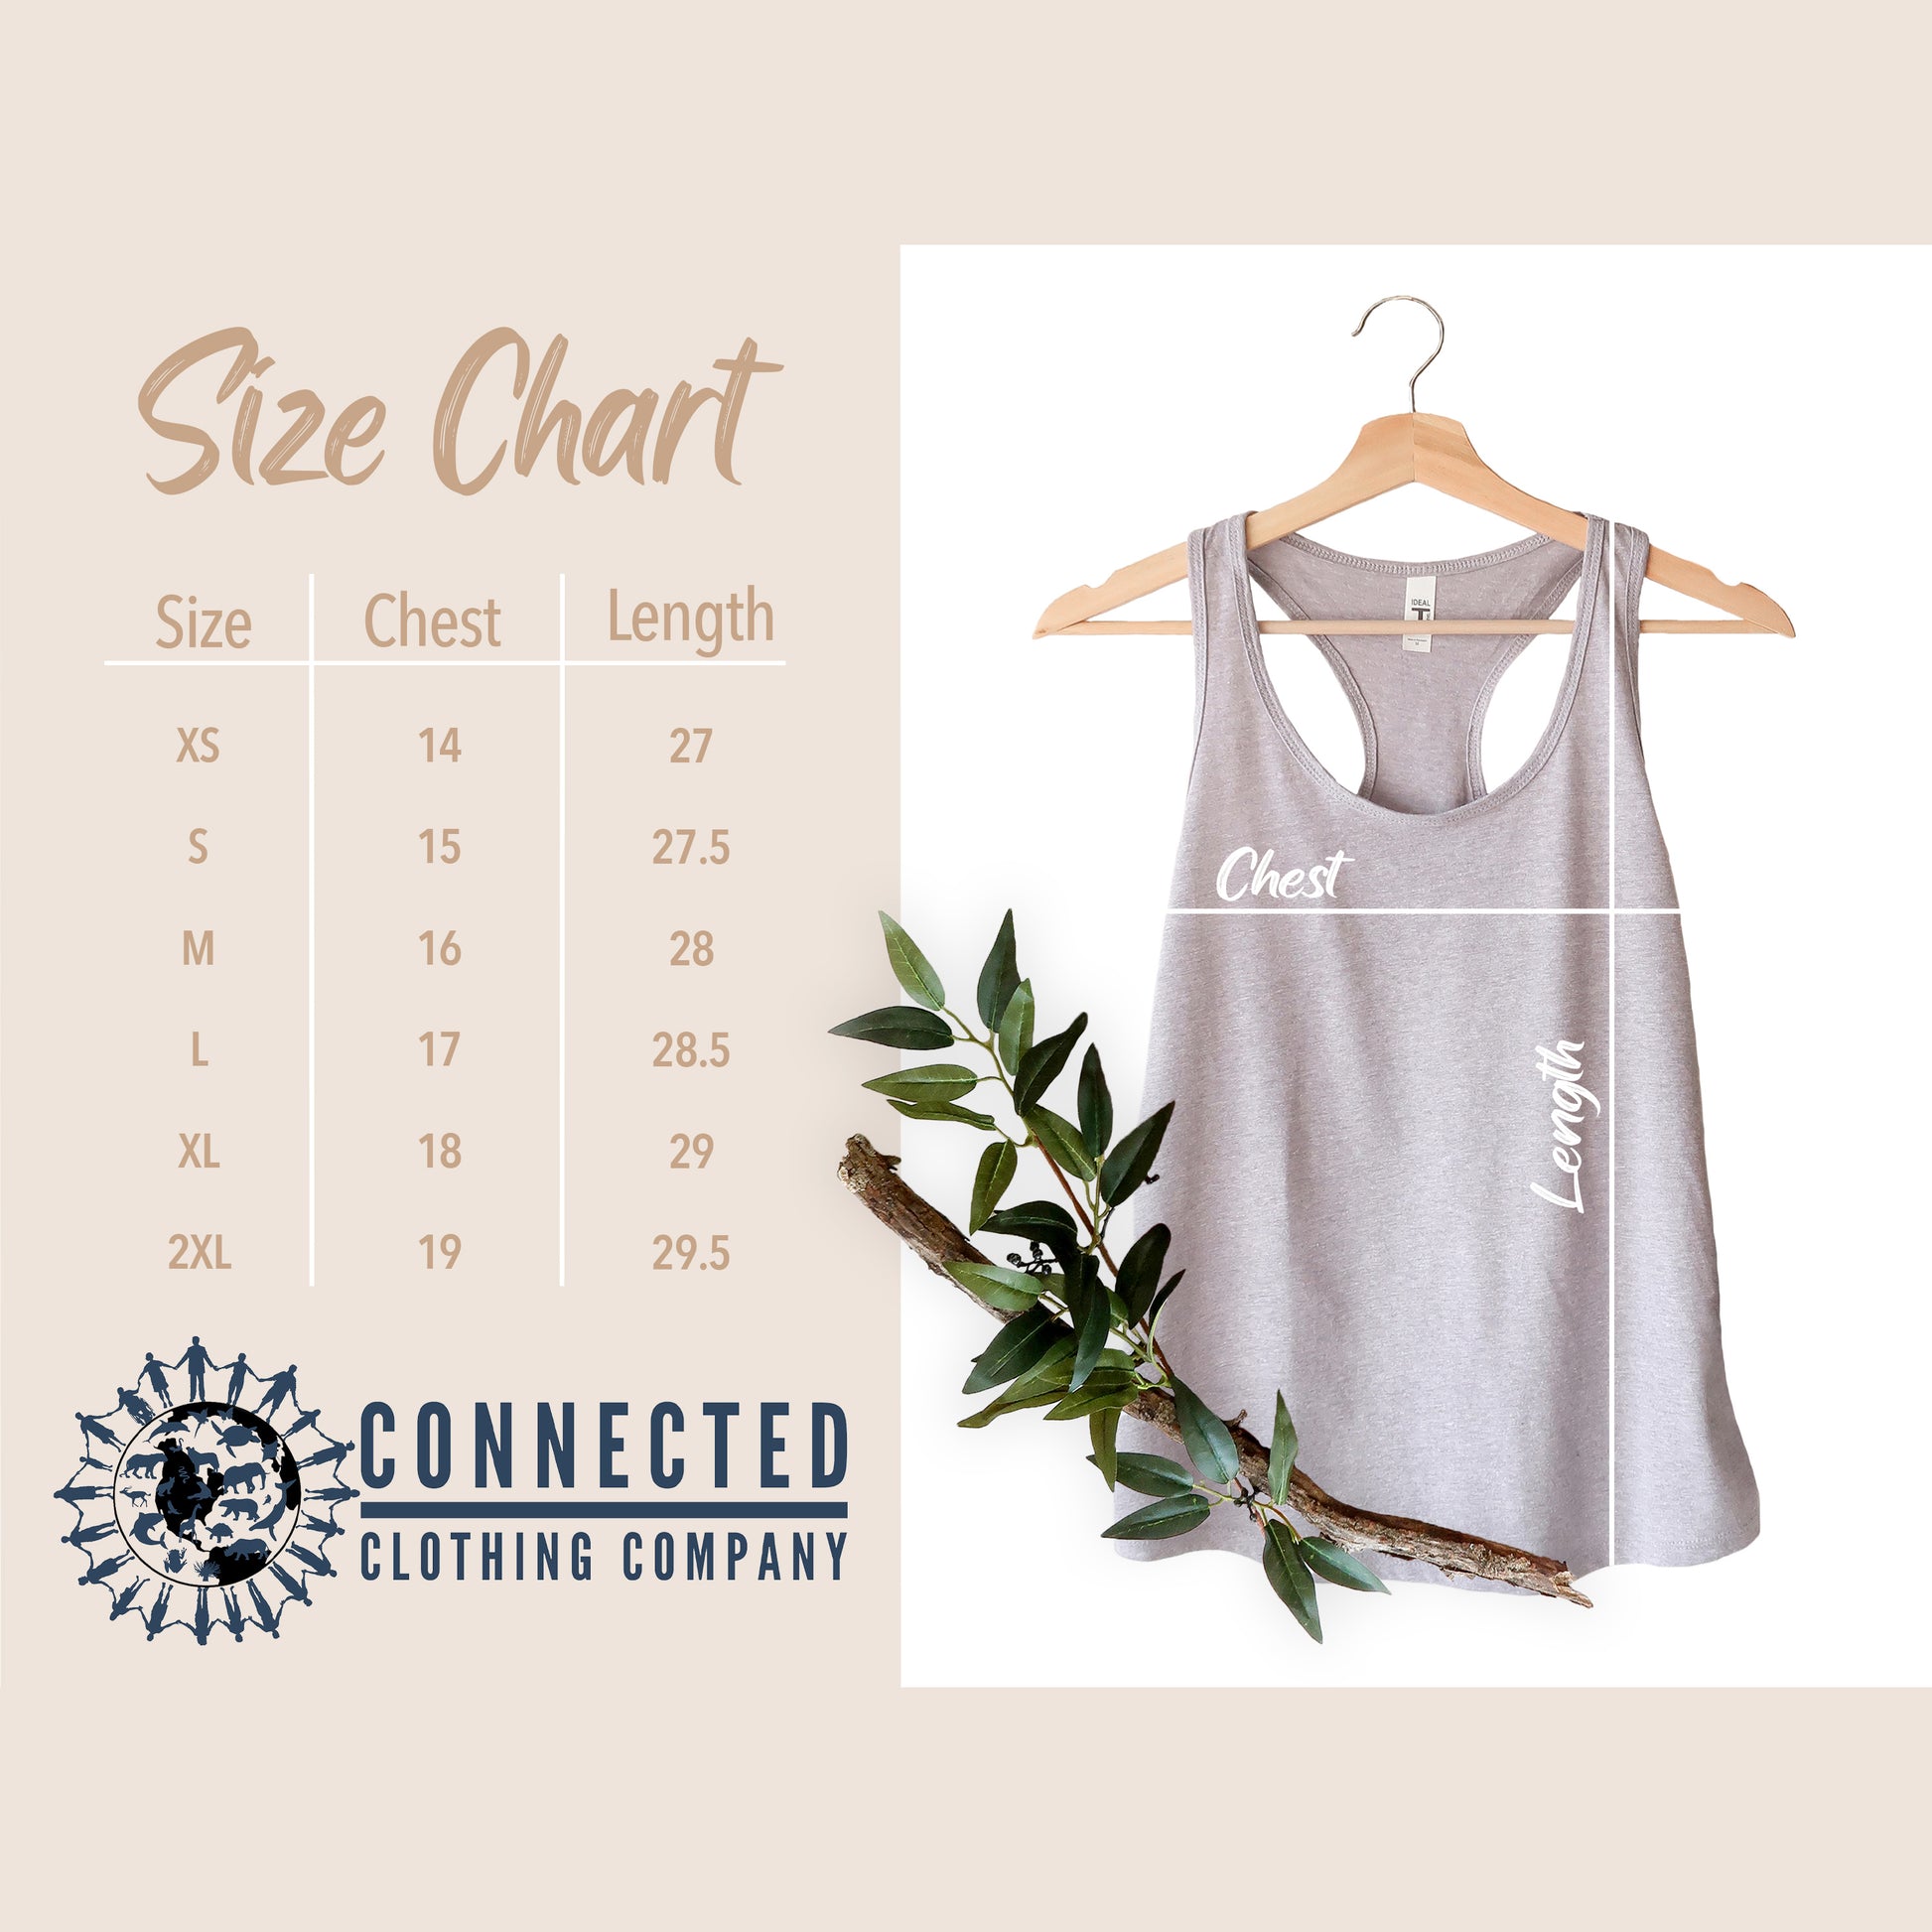 Size Chart for Protect Our Sharks Women's Tank Top - Connected Clothing Company - Ethically and Sustainably Made - 10% of profits donated to Oceana shark conservation